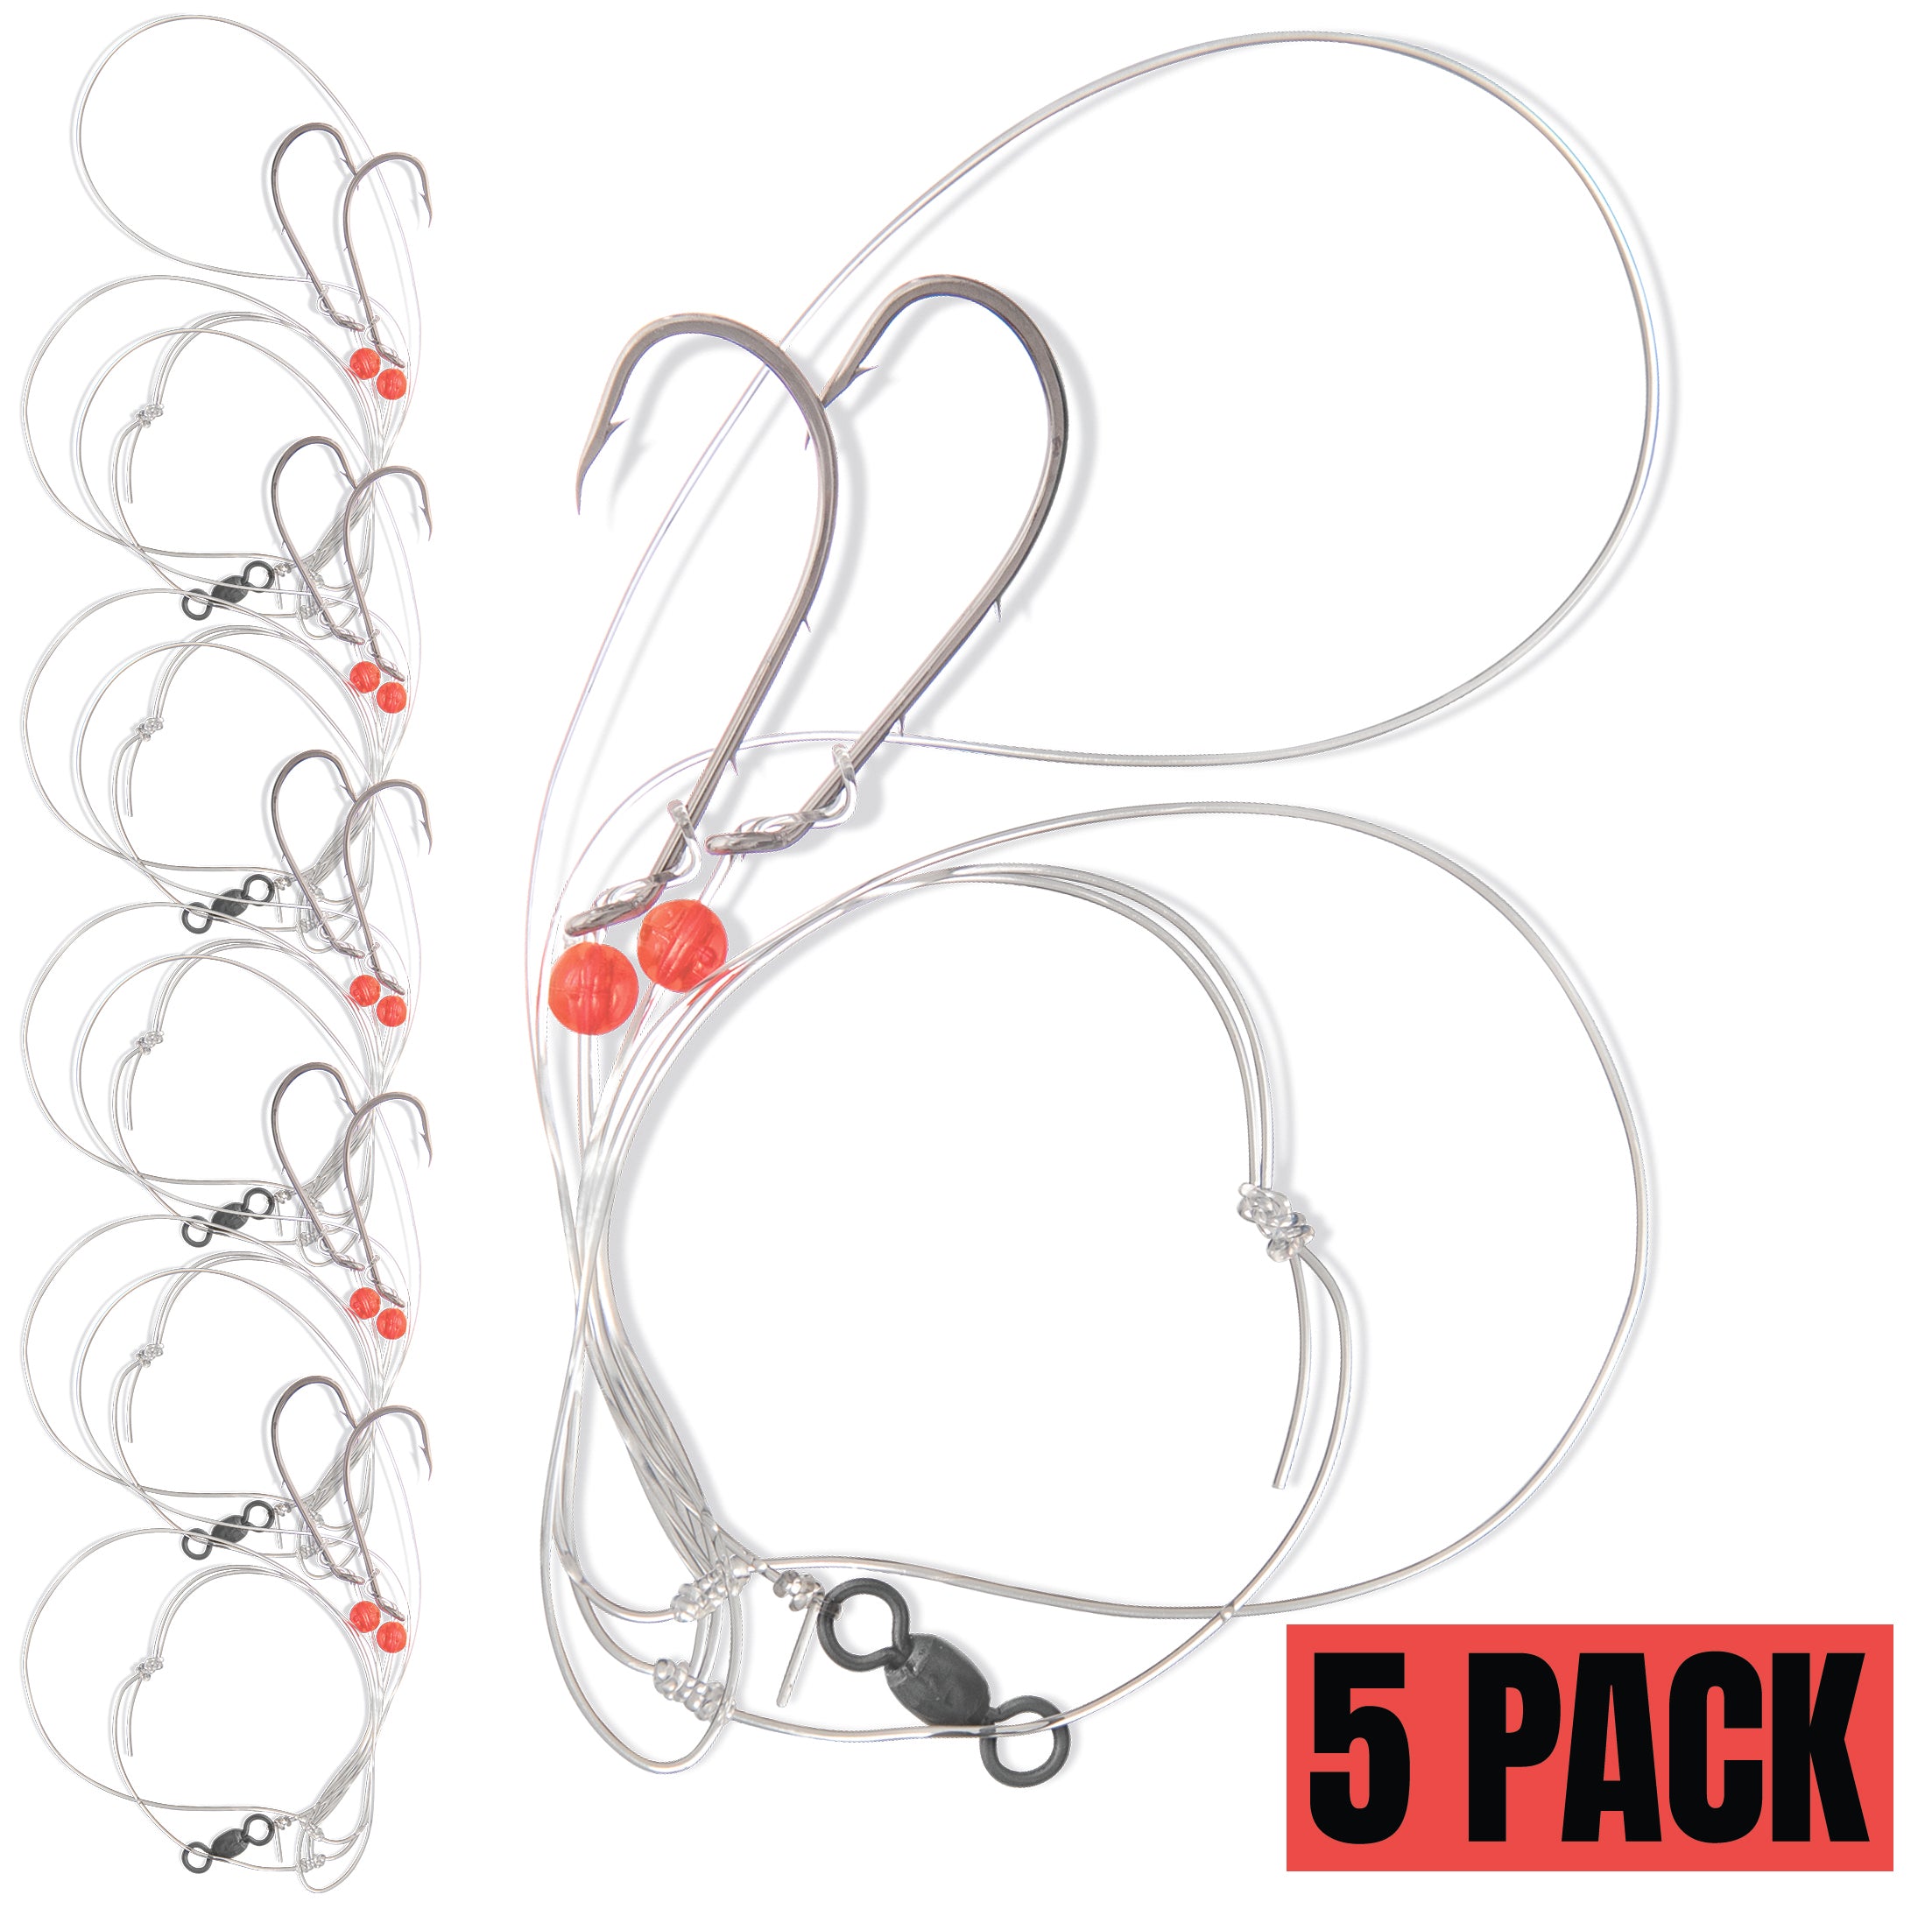 1,5 & 10-Pack Slider Rig 8/0 Circle Hook for Striped Bass - Uncle Mo's  Tackle Saltwater Fishing Gear - Robust Slider, 4ft 60lb Monofilament Leader  for